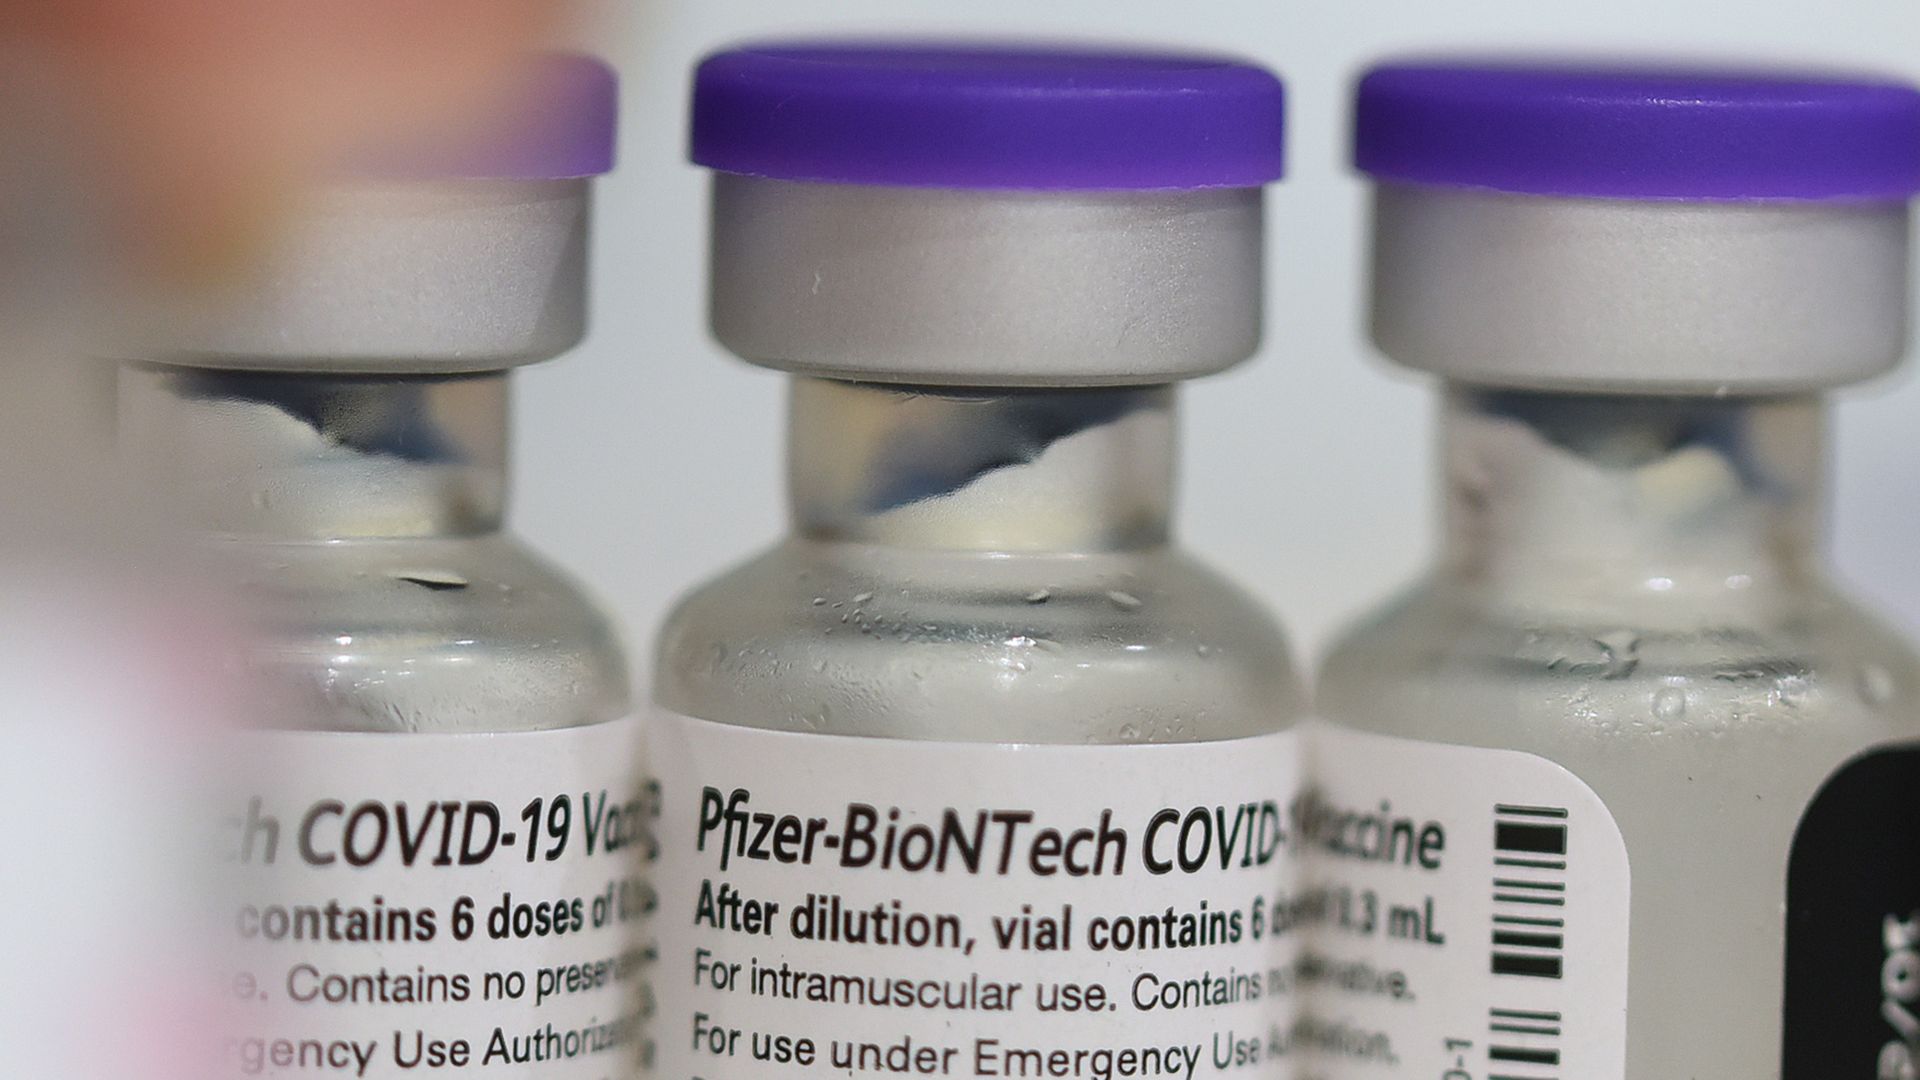 A close-up shot of three vials of the Pfizer-BioNTech COVID-19 vaccine.